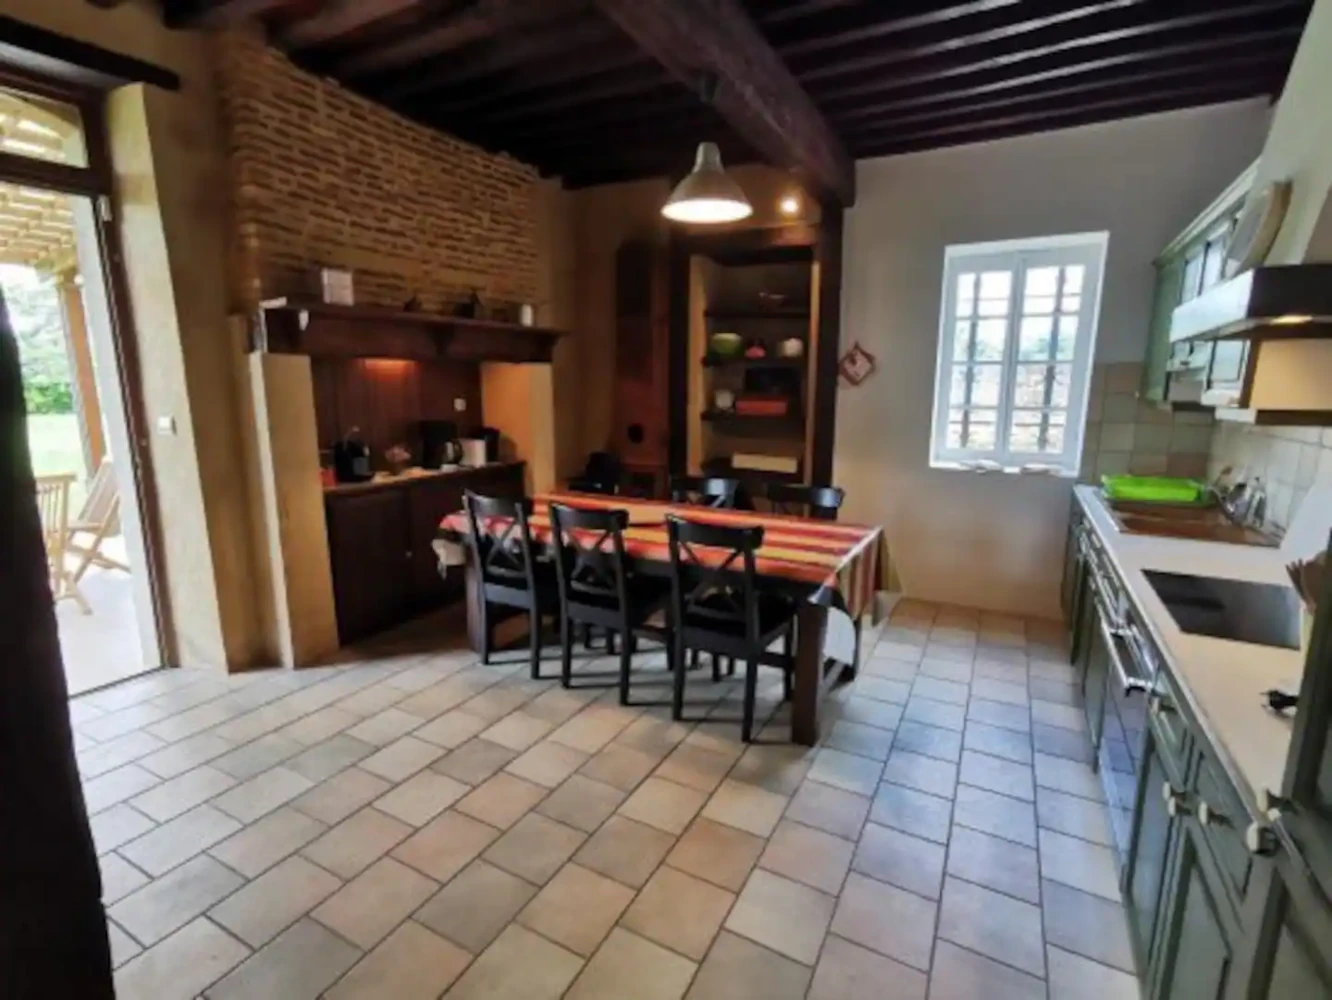 Kitchen which opens onto the patio and garden.